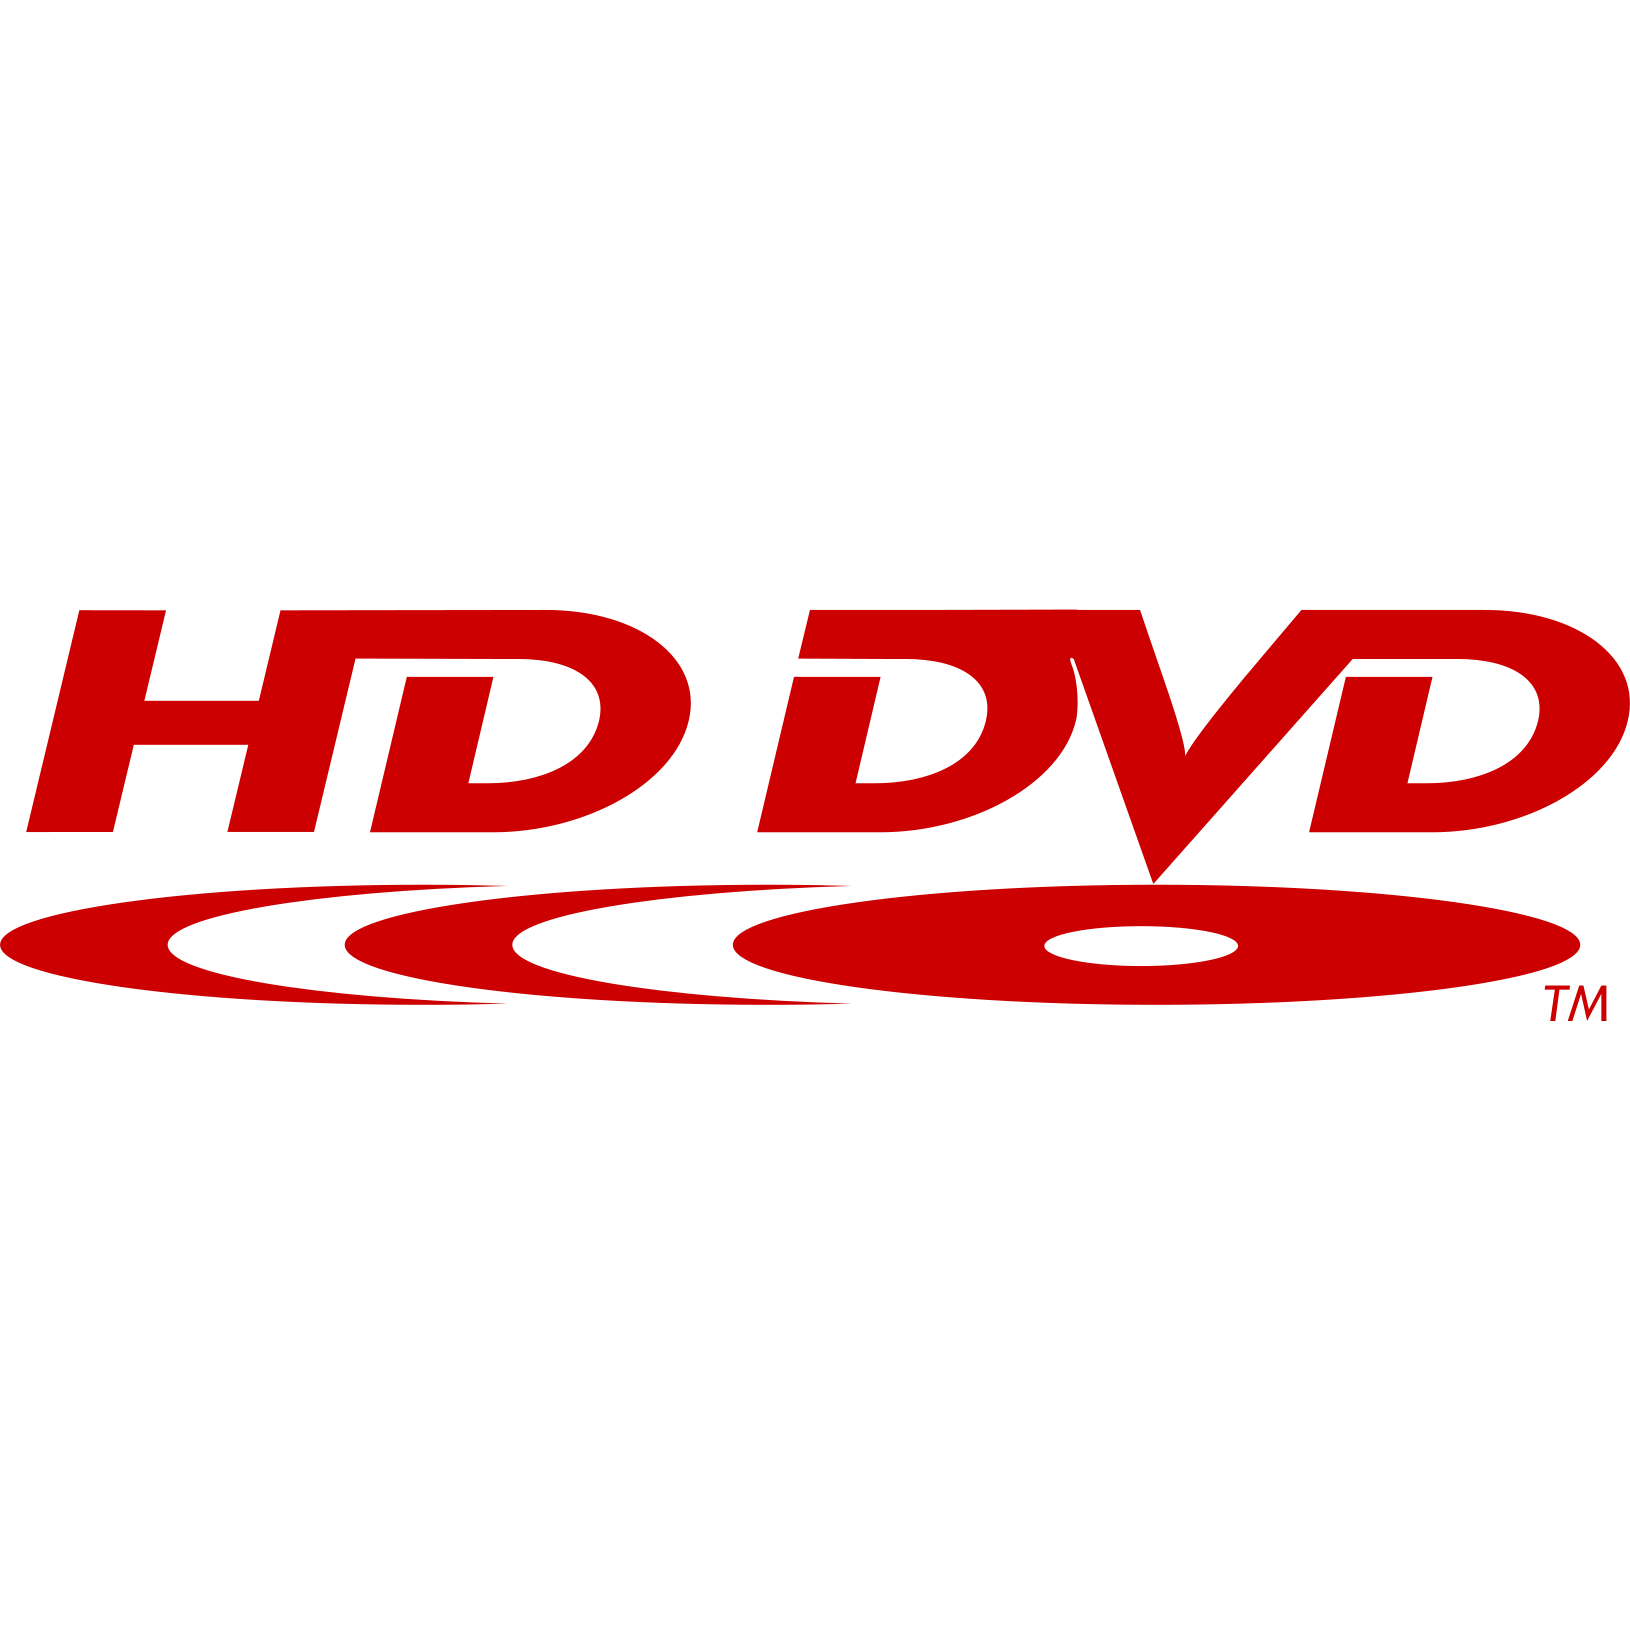 Dvd Logo HD PNG #19251 - Free Icons and PNG Backgrounds - 1630 x 1630 png 45kB